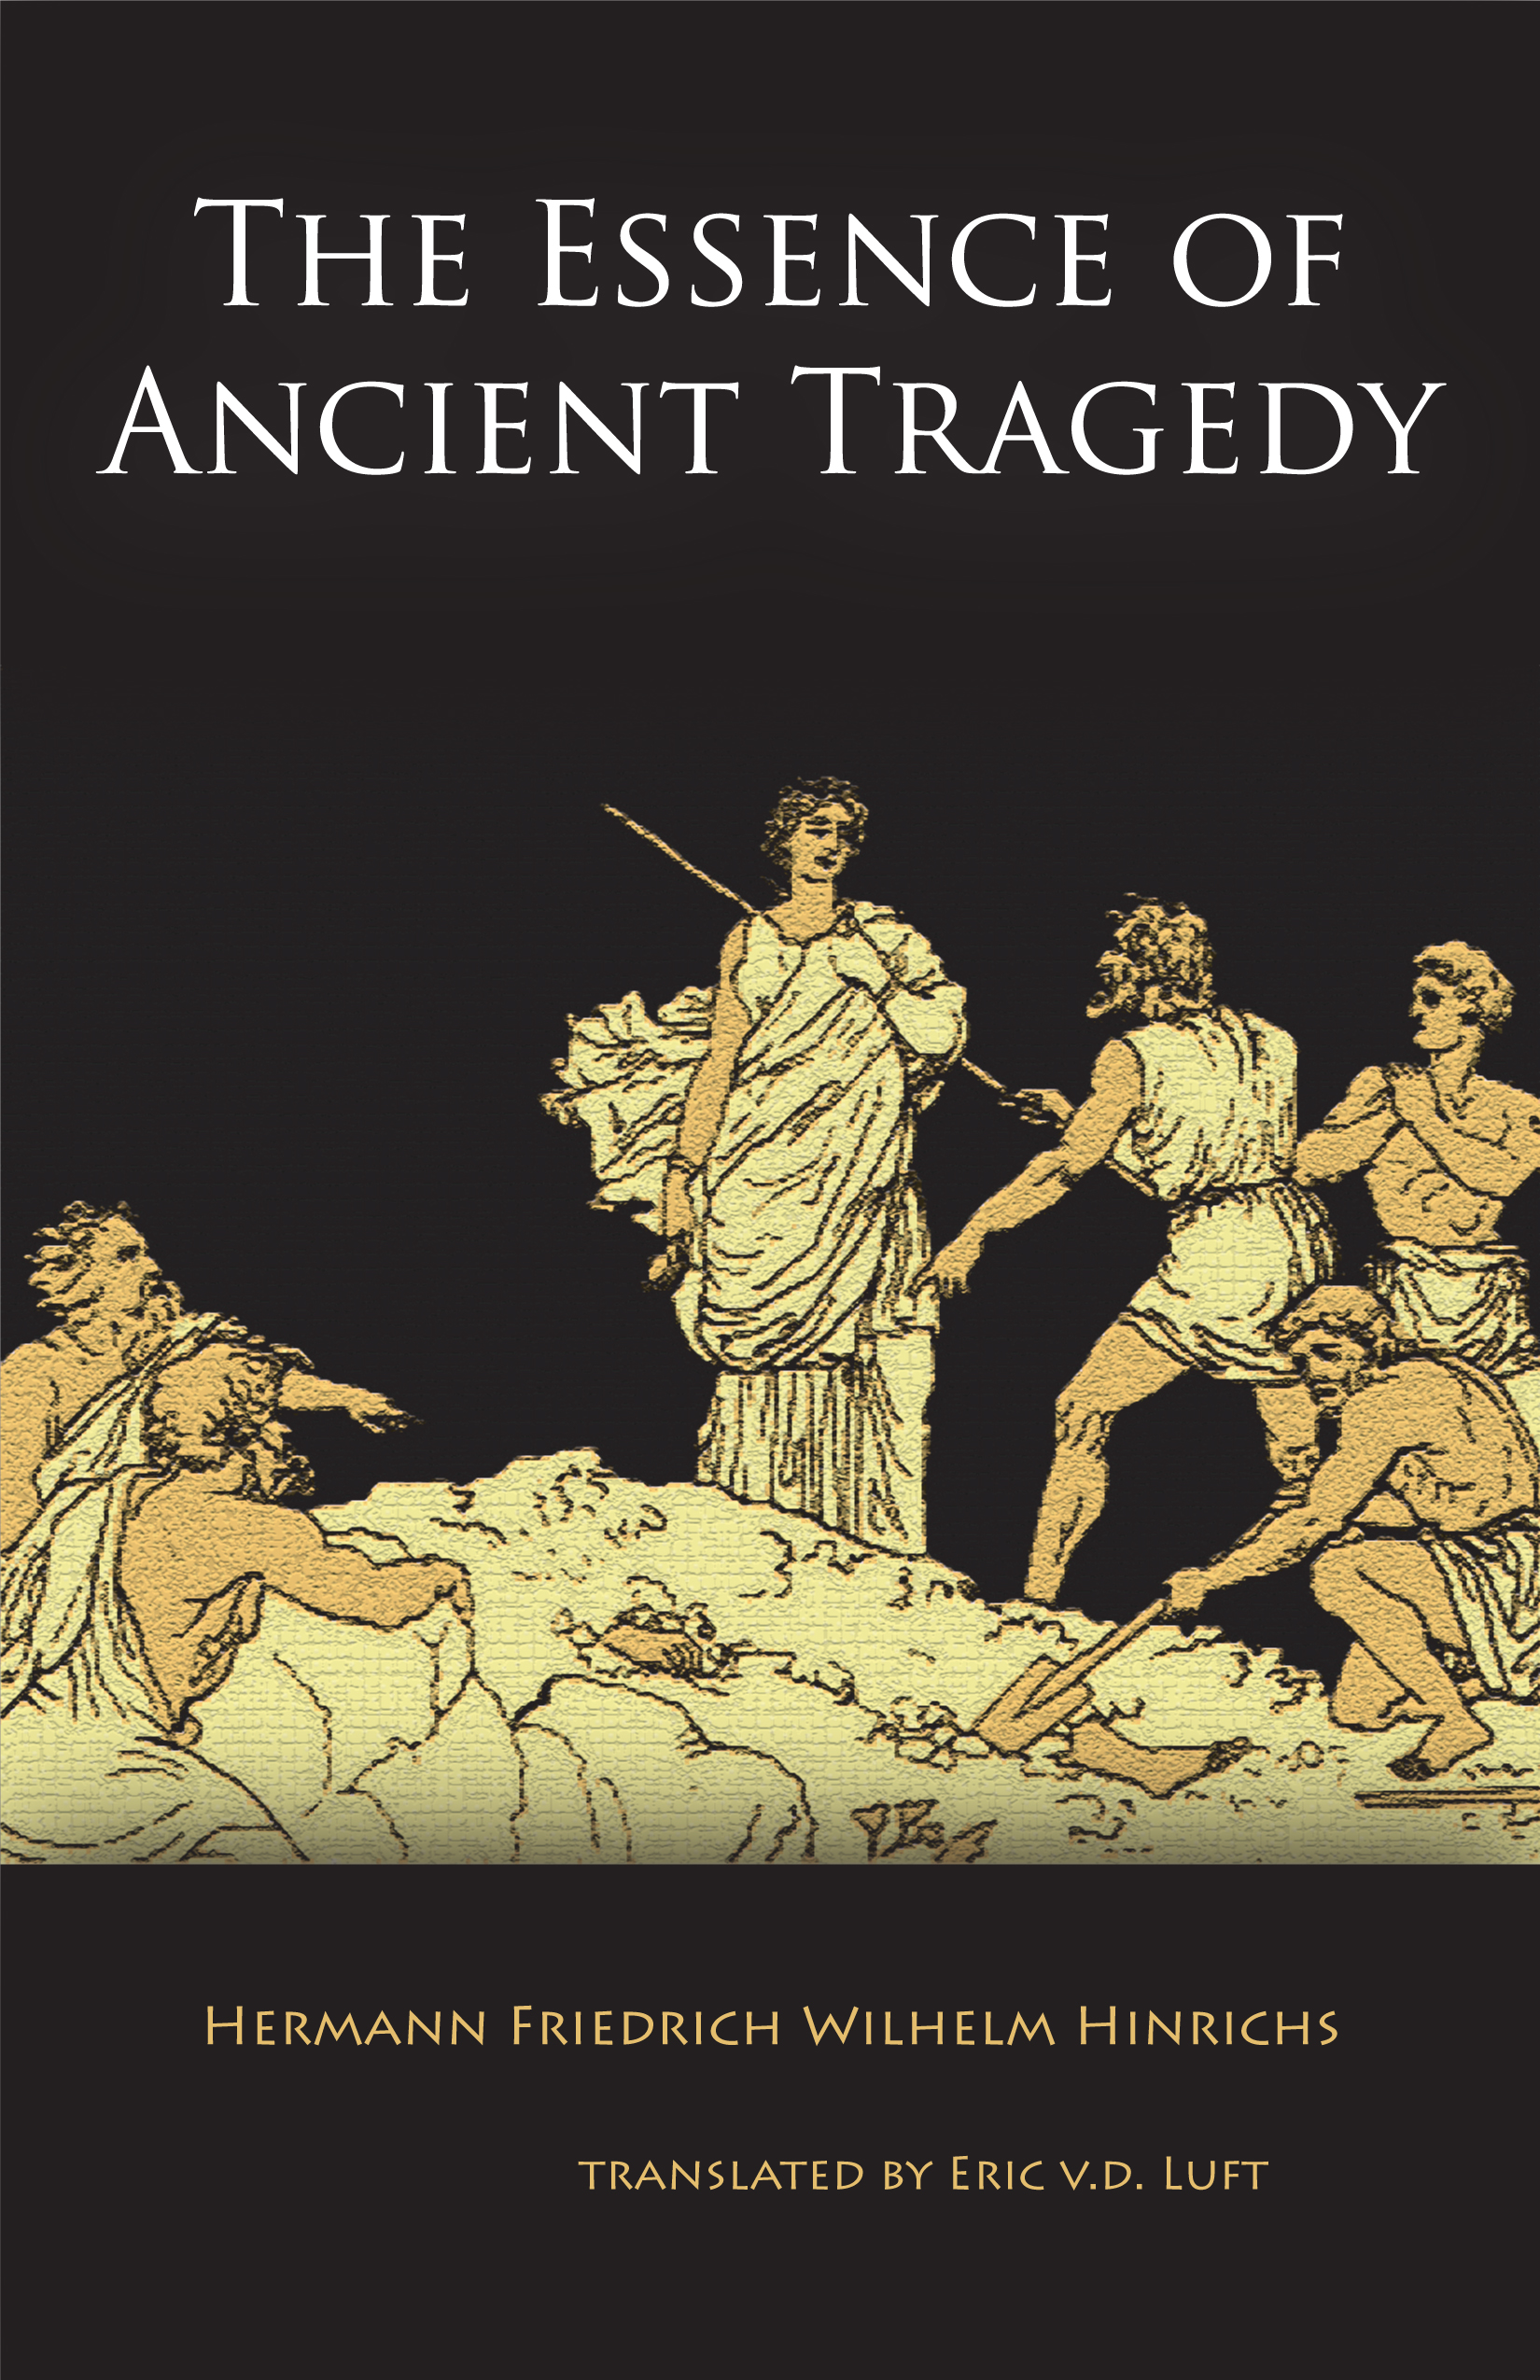 The Essence of Ancient Tragedy by H.F.W. Hinrichs